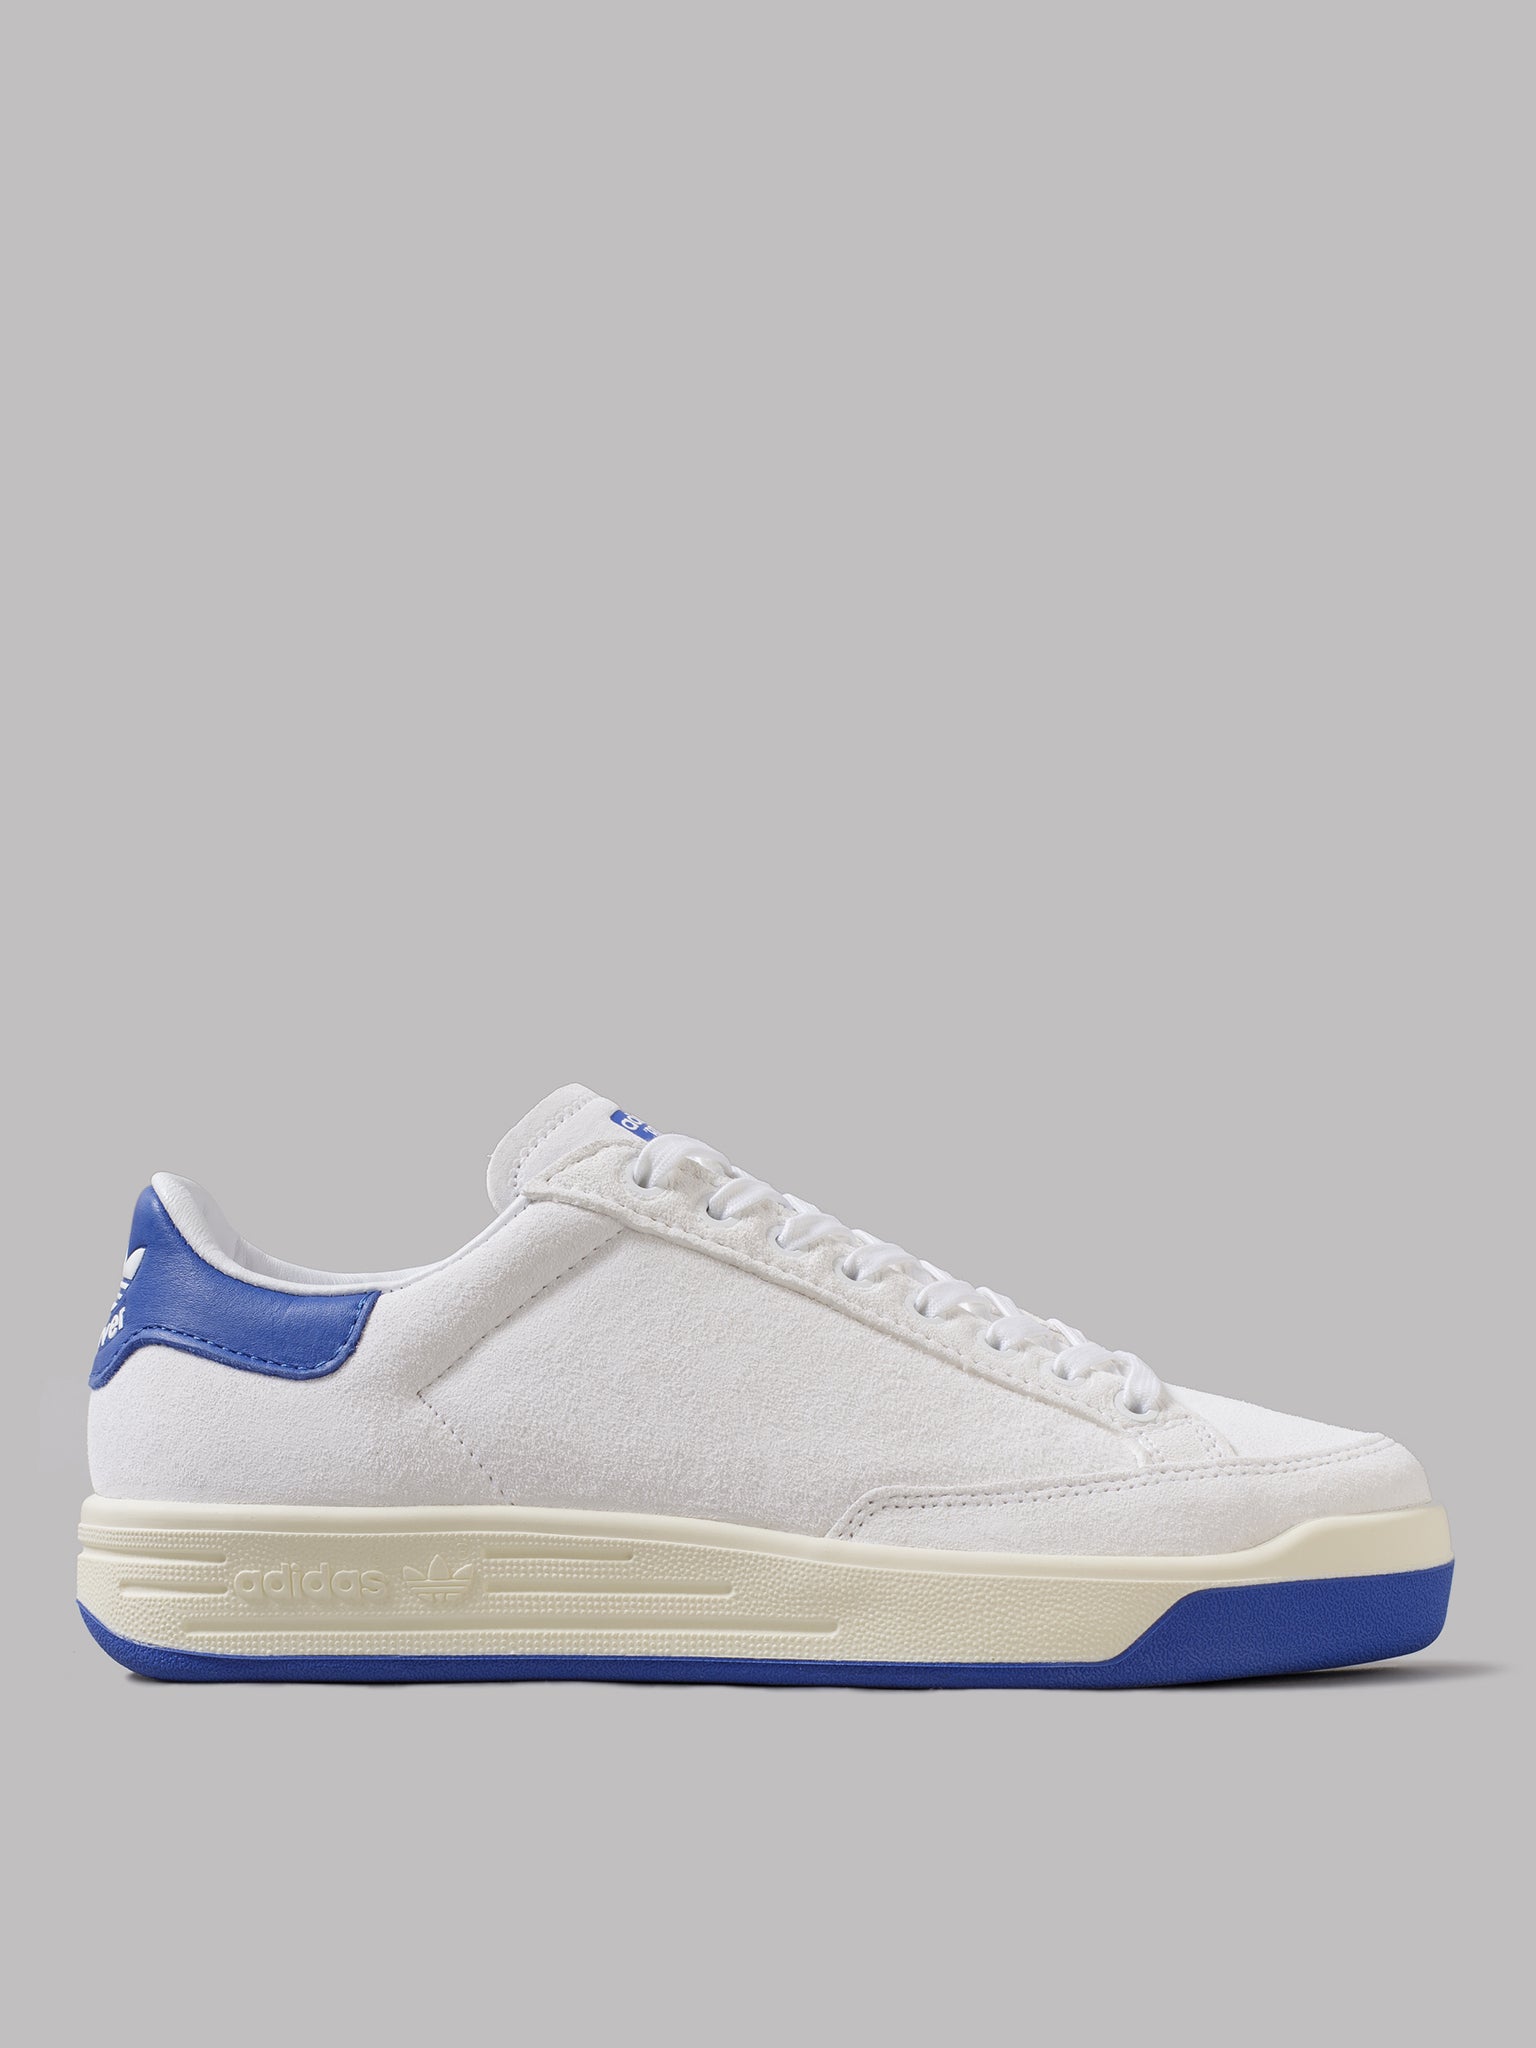 adidas rod laver trainers